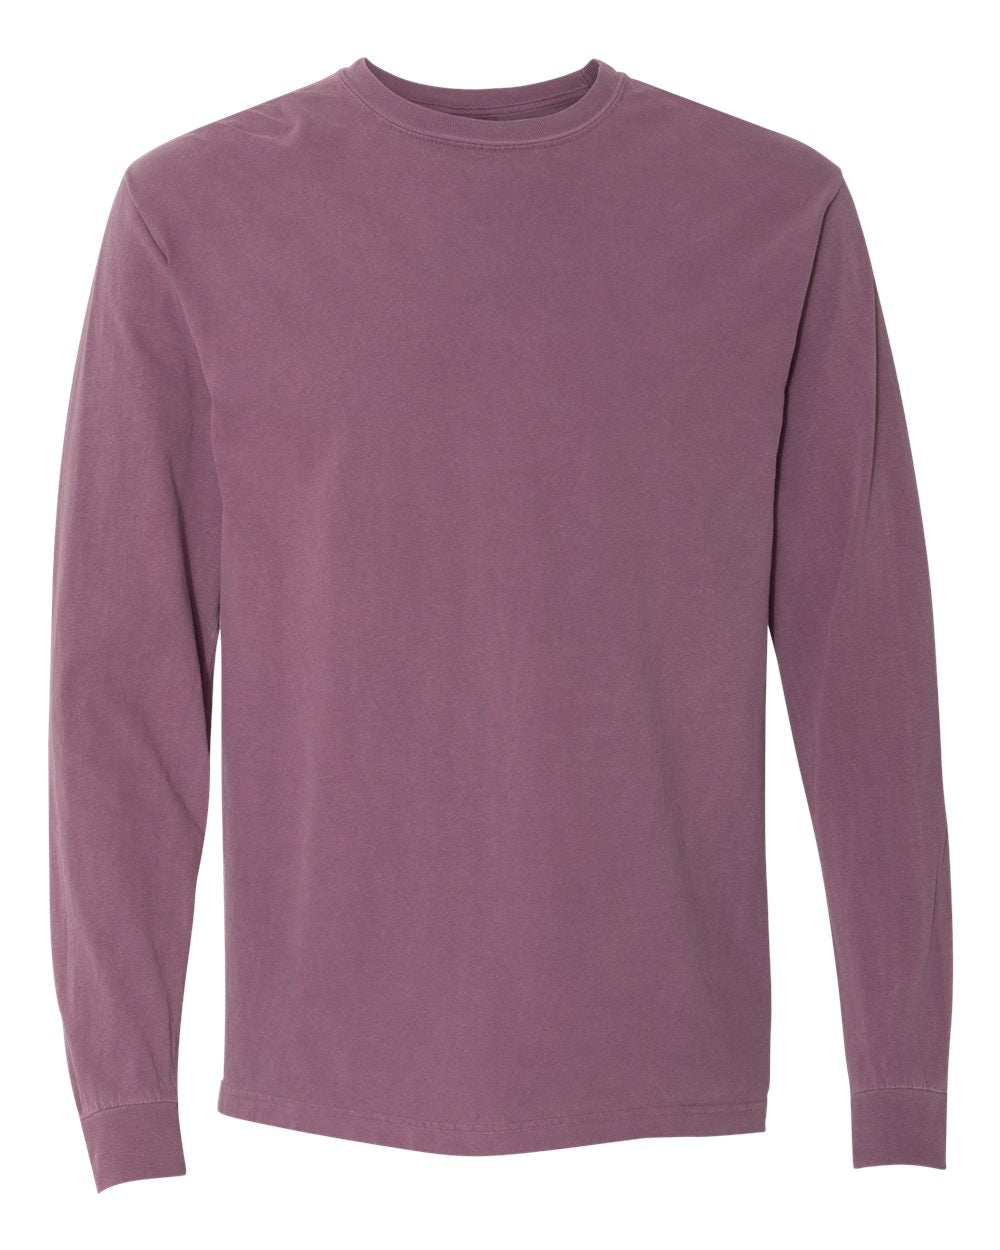 Comfort Colors Long Sleeve Tee (No Pocket) - Kite and Crest